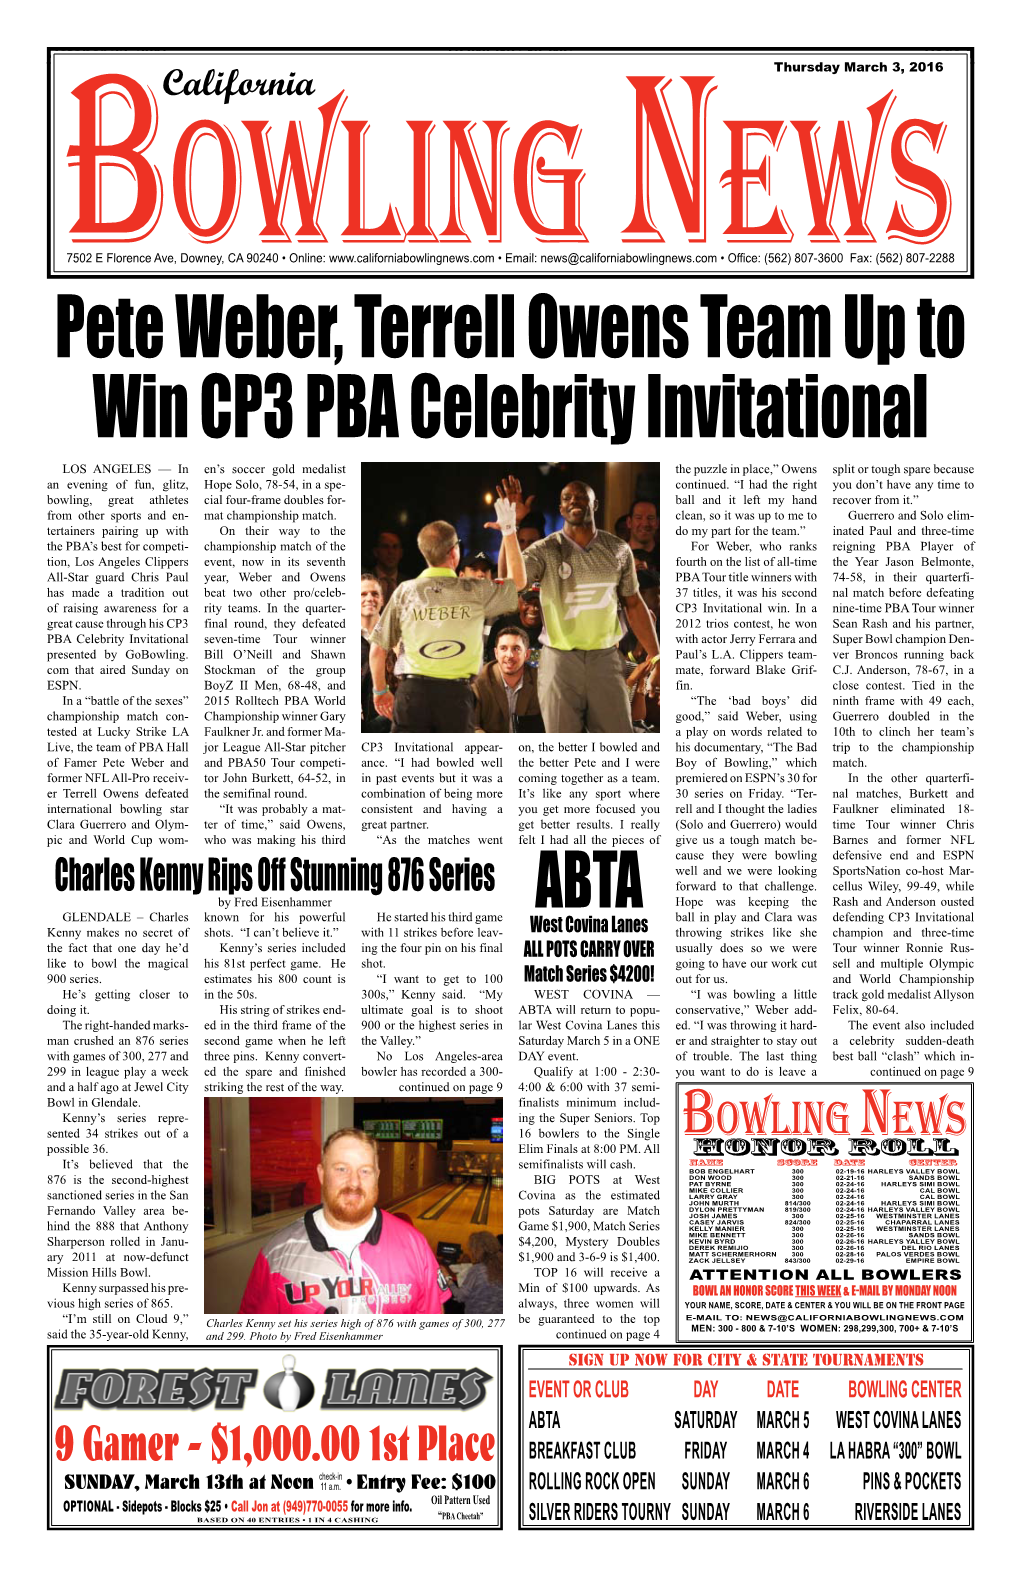 Pete Weber, Terrell Owens Team up to Win Cp3 Pba Celebrity Invitational